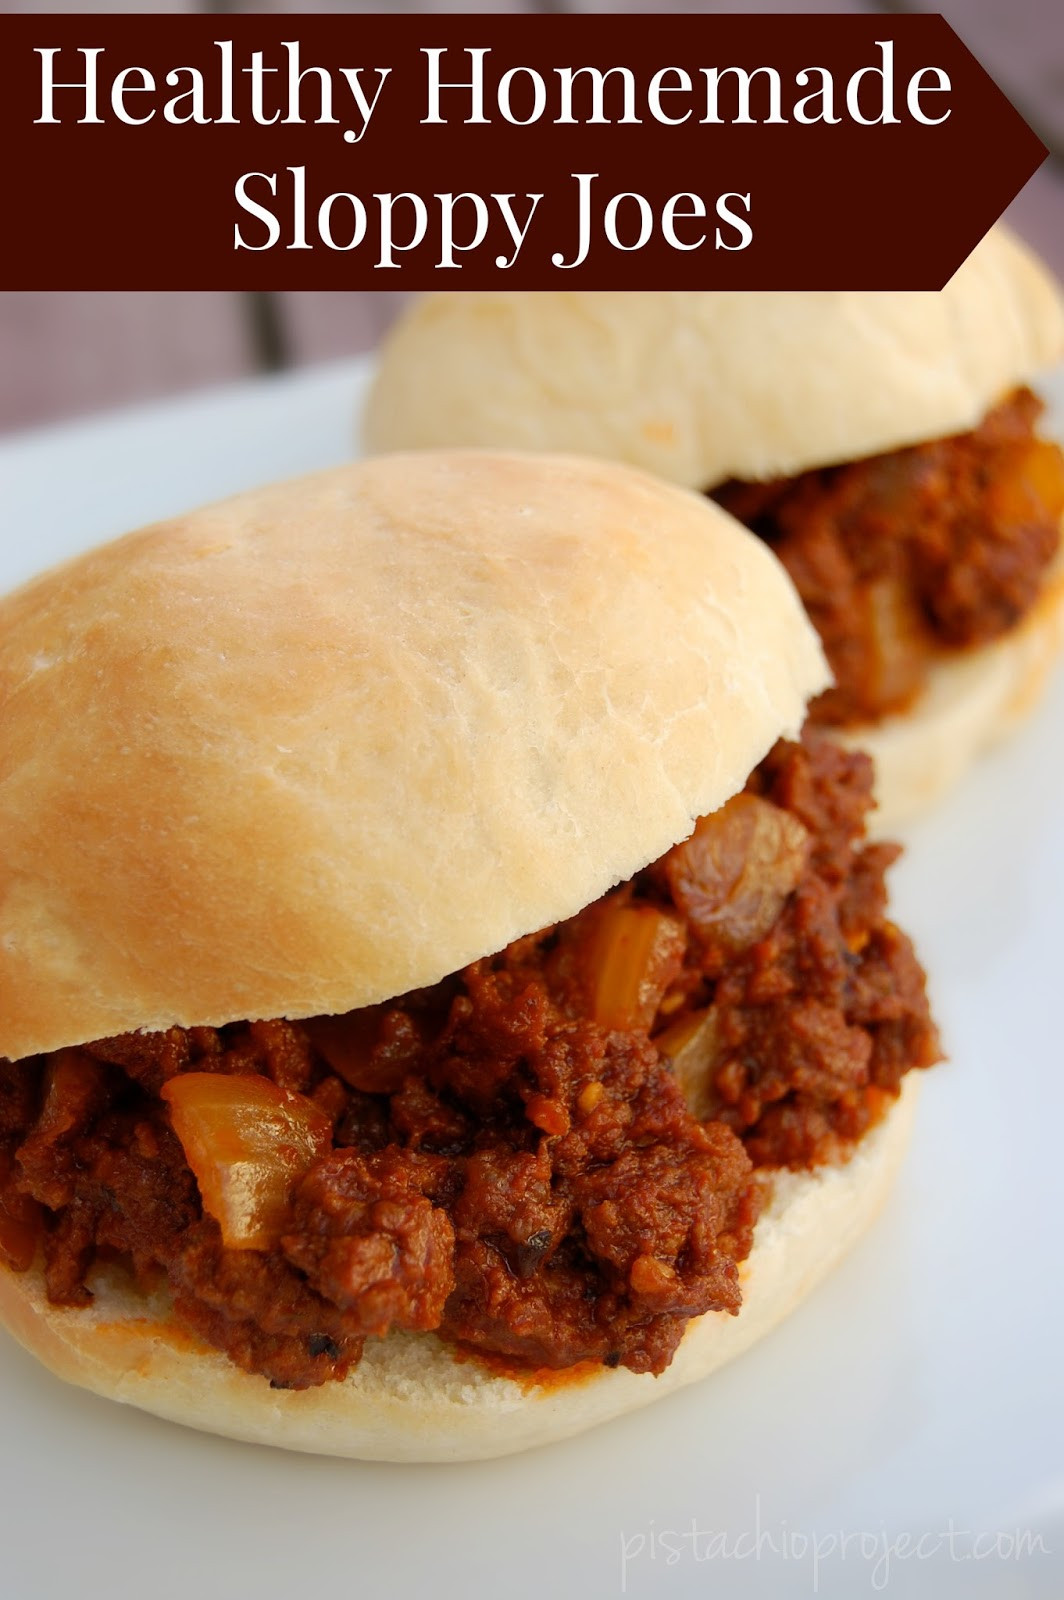 Homemade Sloppy Joes Healthy Best 20 Healthy Homemade Sloppy Joes the Pistachio Project